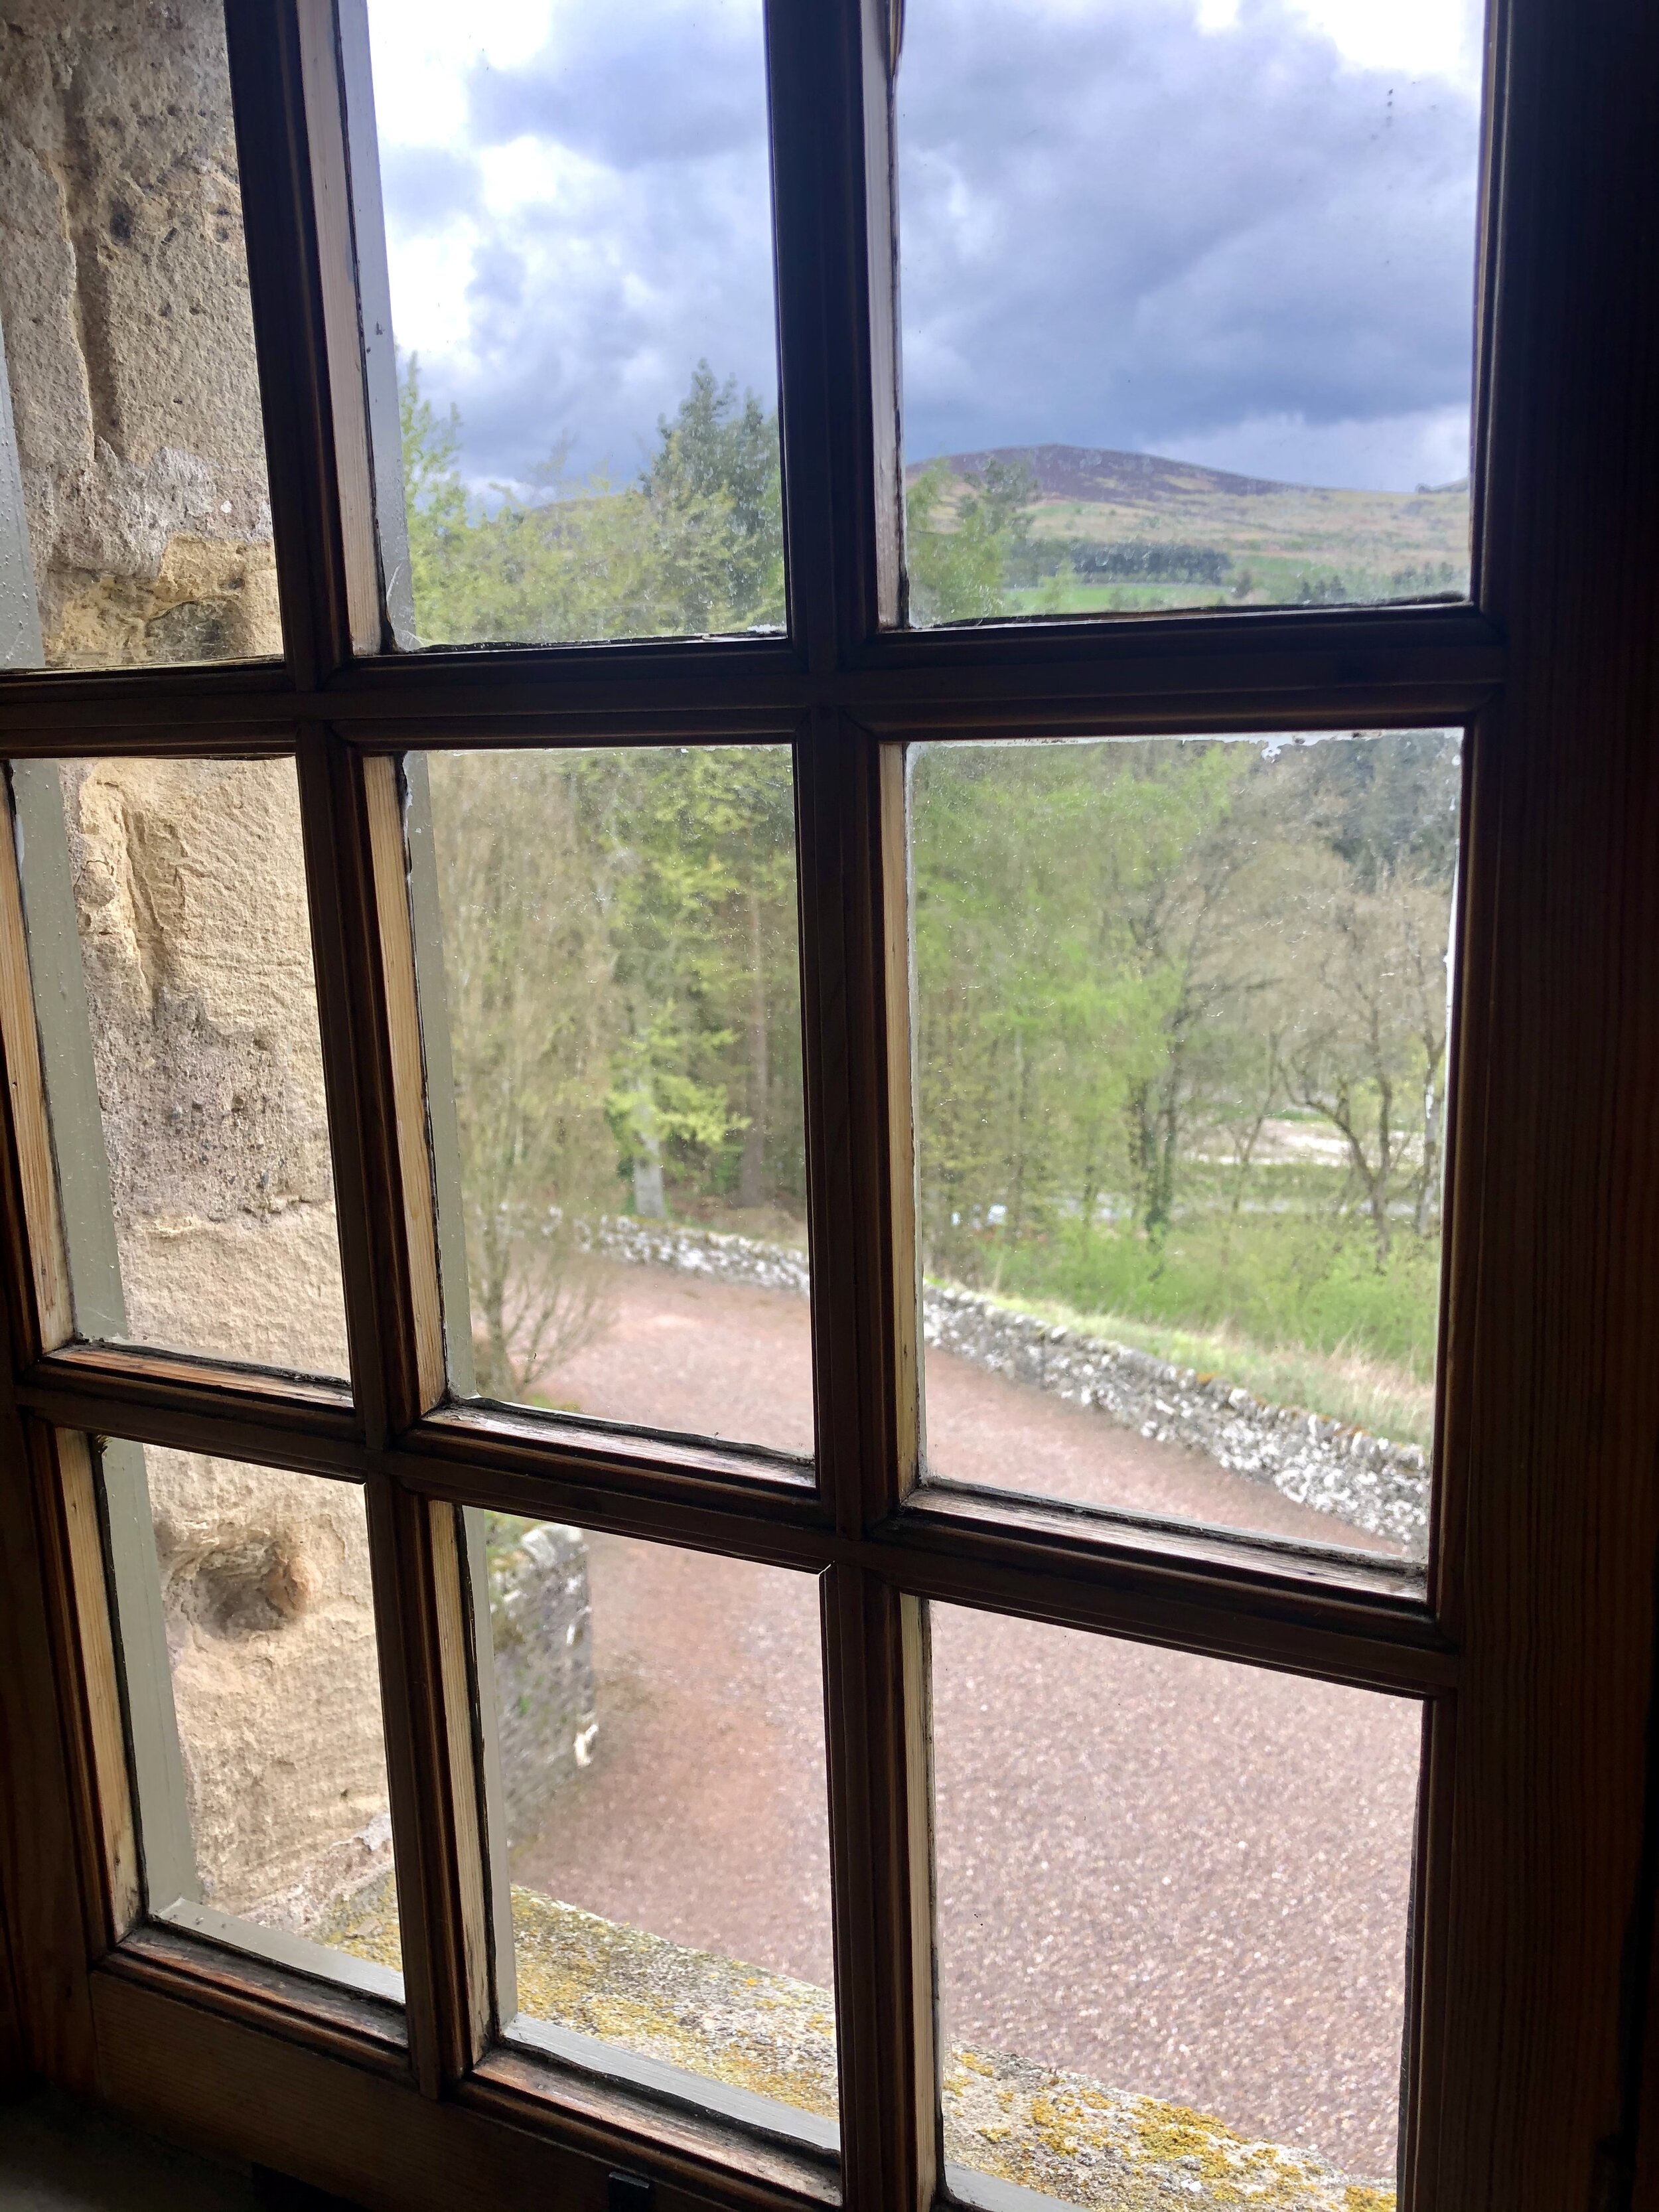 From the Buccleuch Bedroom down to the Ettrick Valley